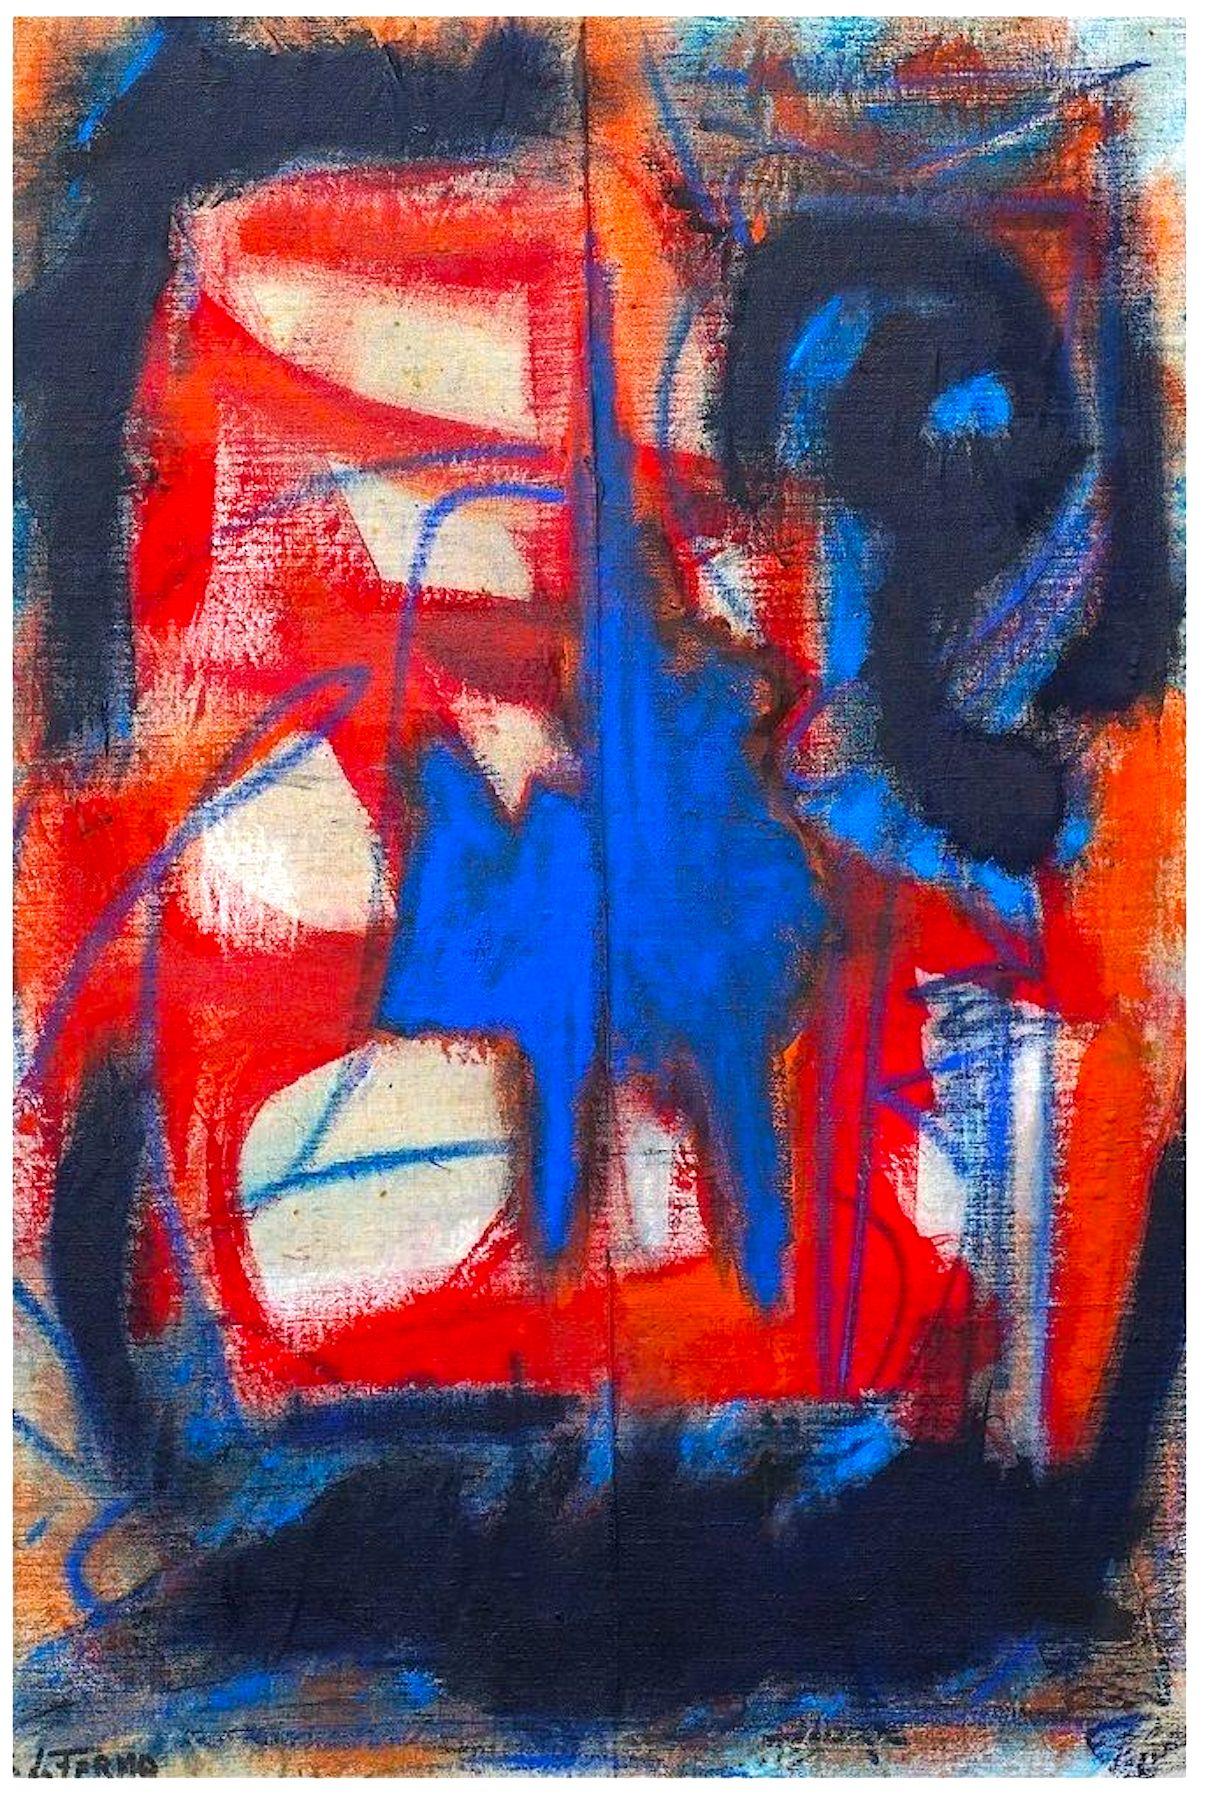 Untitled - Abstract Expression -  Oil Painting 2016